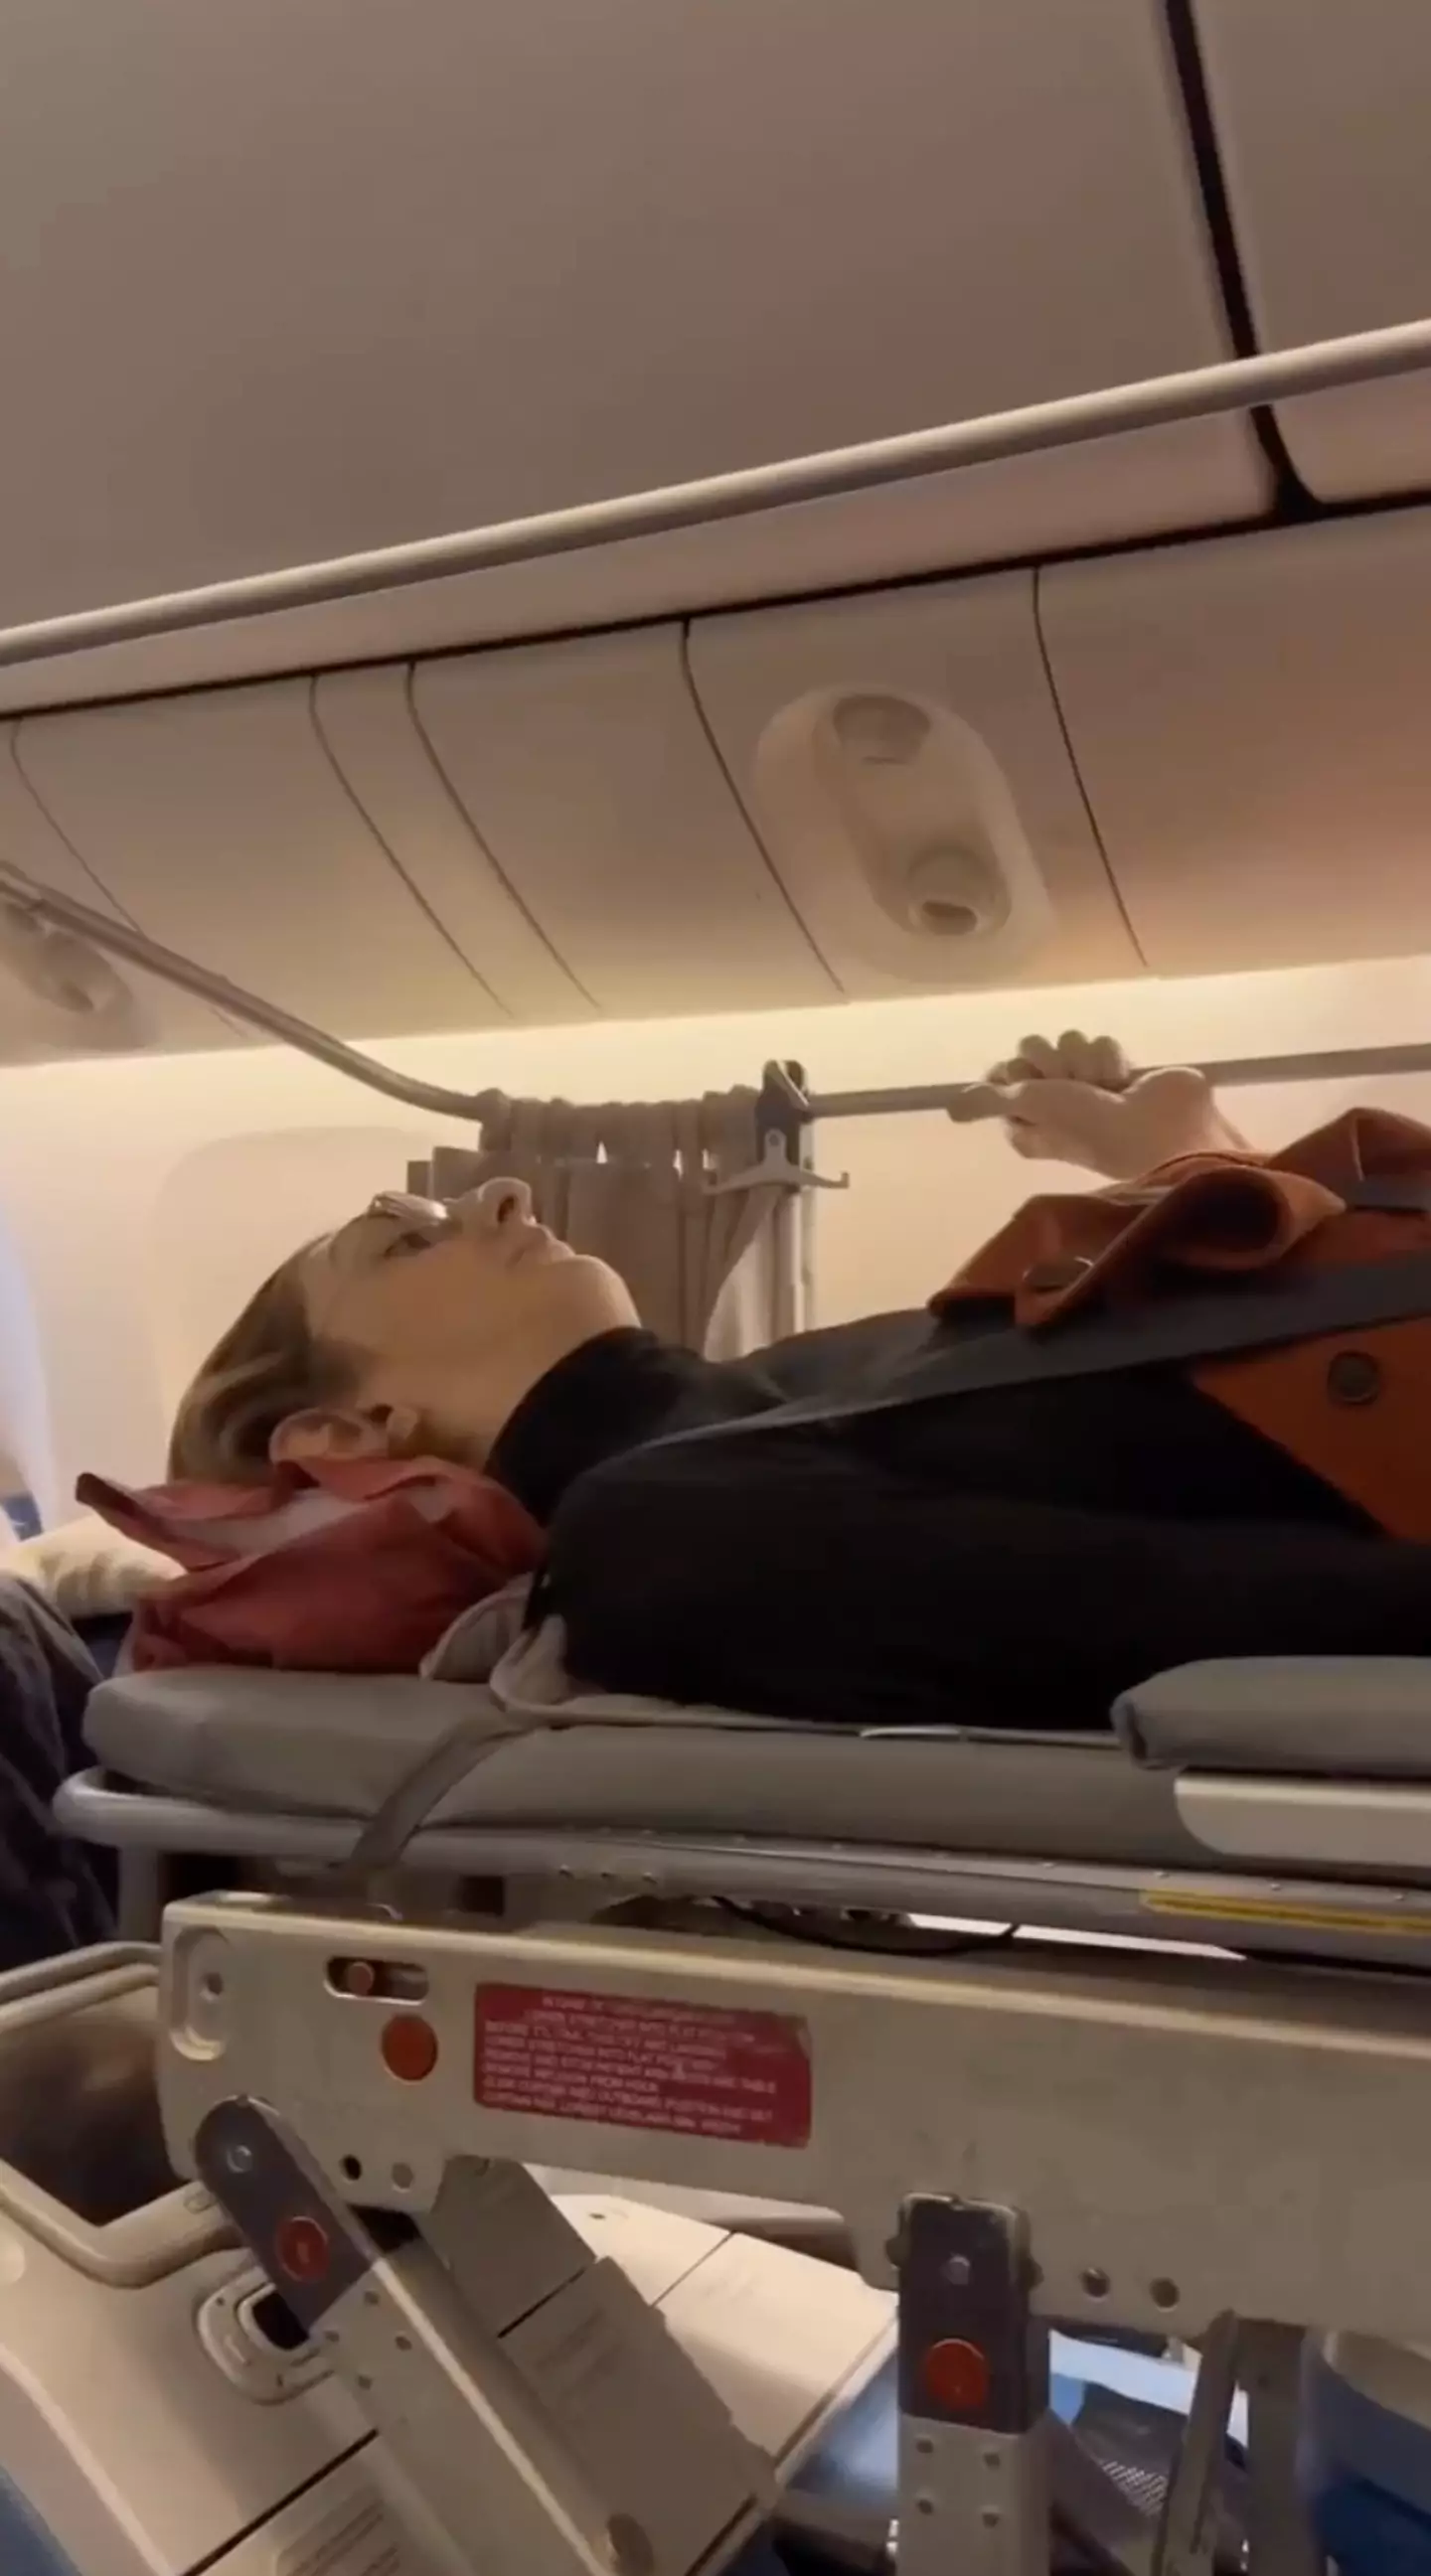 The world's tallest woman then lay horizontally in the bed during the flight.